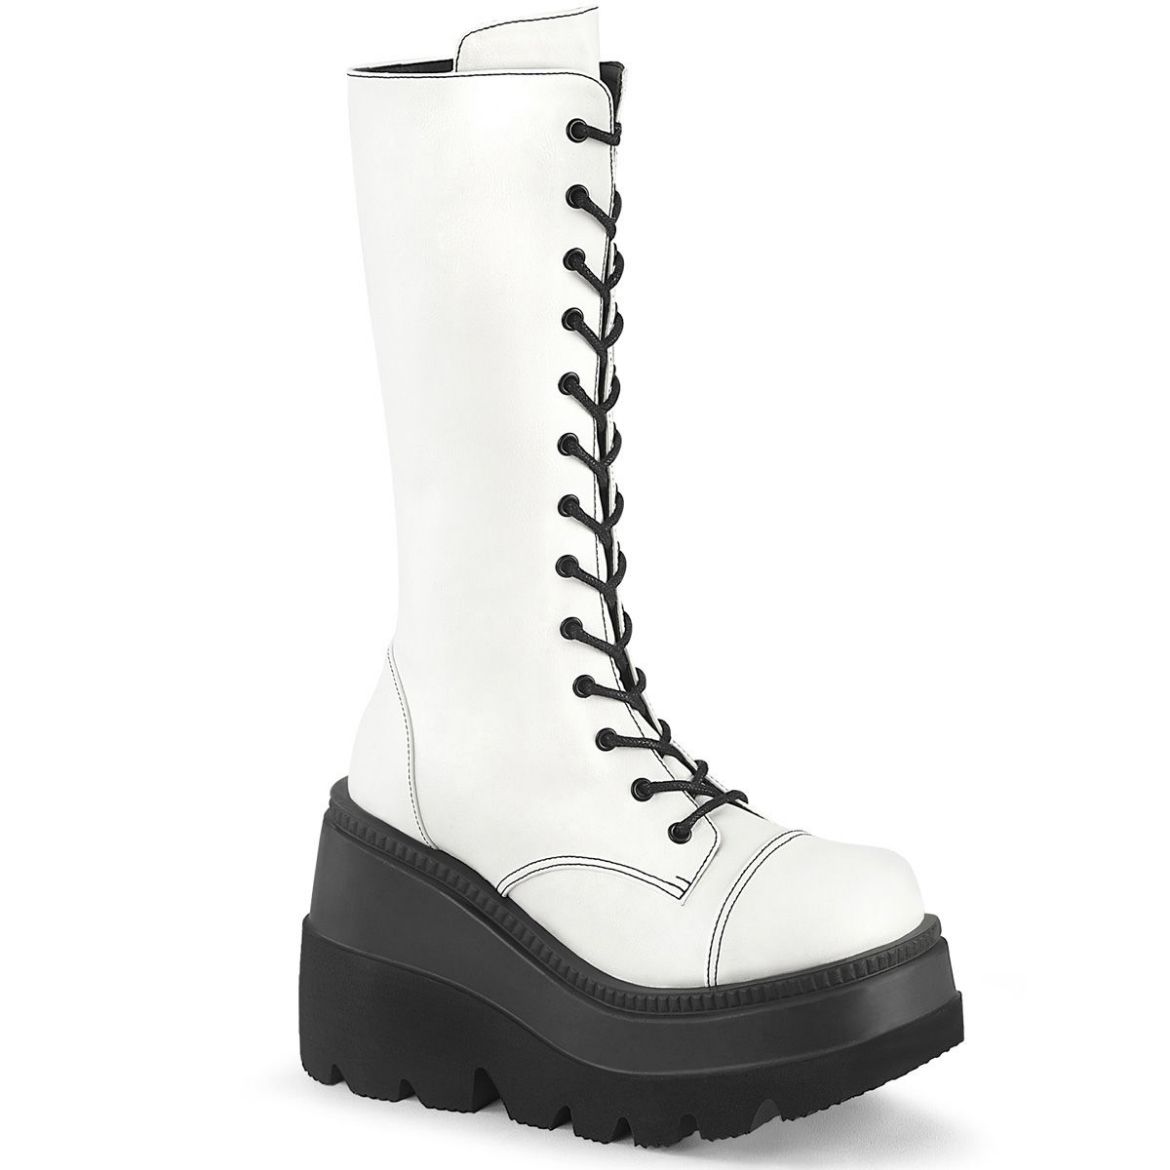 Image of Demonia SHAKER-72 Wht Vegan Leather 4 1/2 Inch Wedge PF Lace-Up Mid-Calf Boot Side Zip